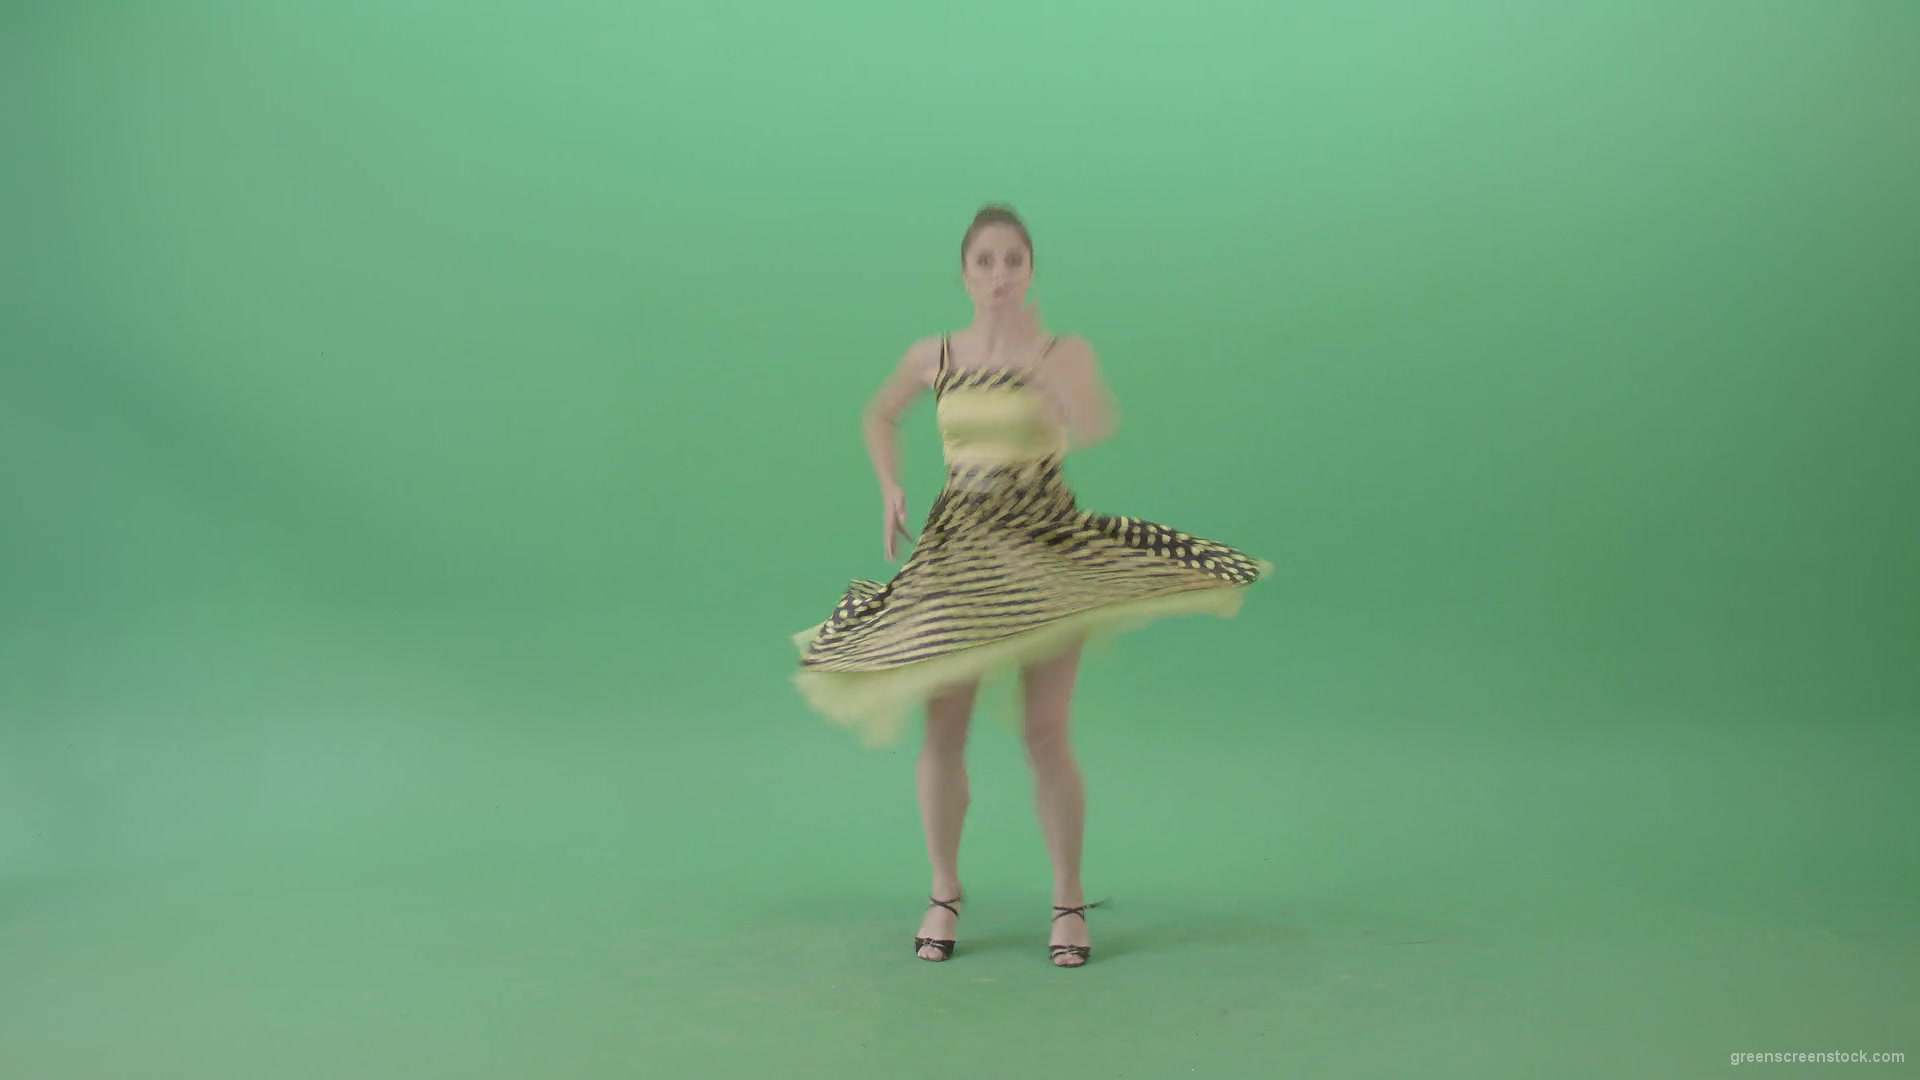 Happy-Woman-dancing-Rock-and-Roll-Jazz-Swing-Boogie-woogie-isolated-on-Green-Screen-4K-Video-Footage-1920_009 Green Screen Stock